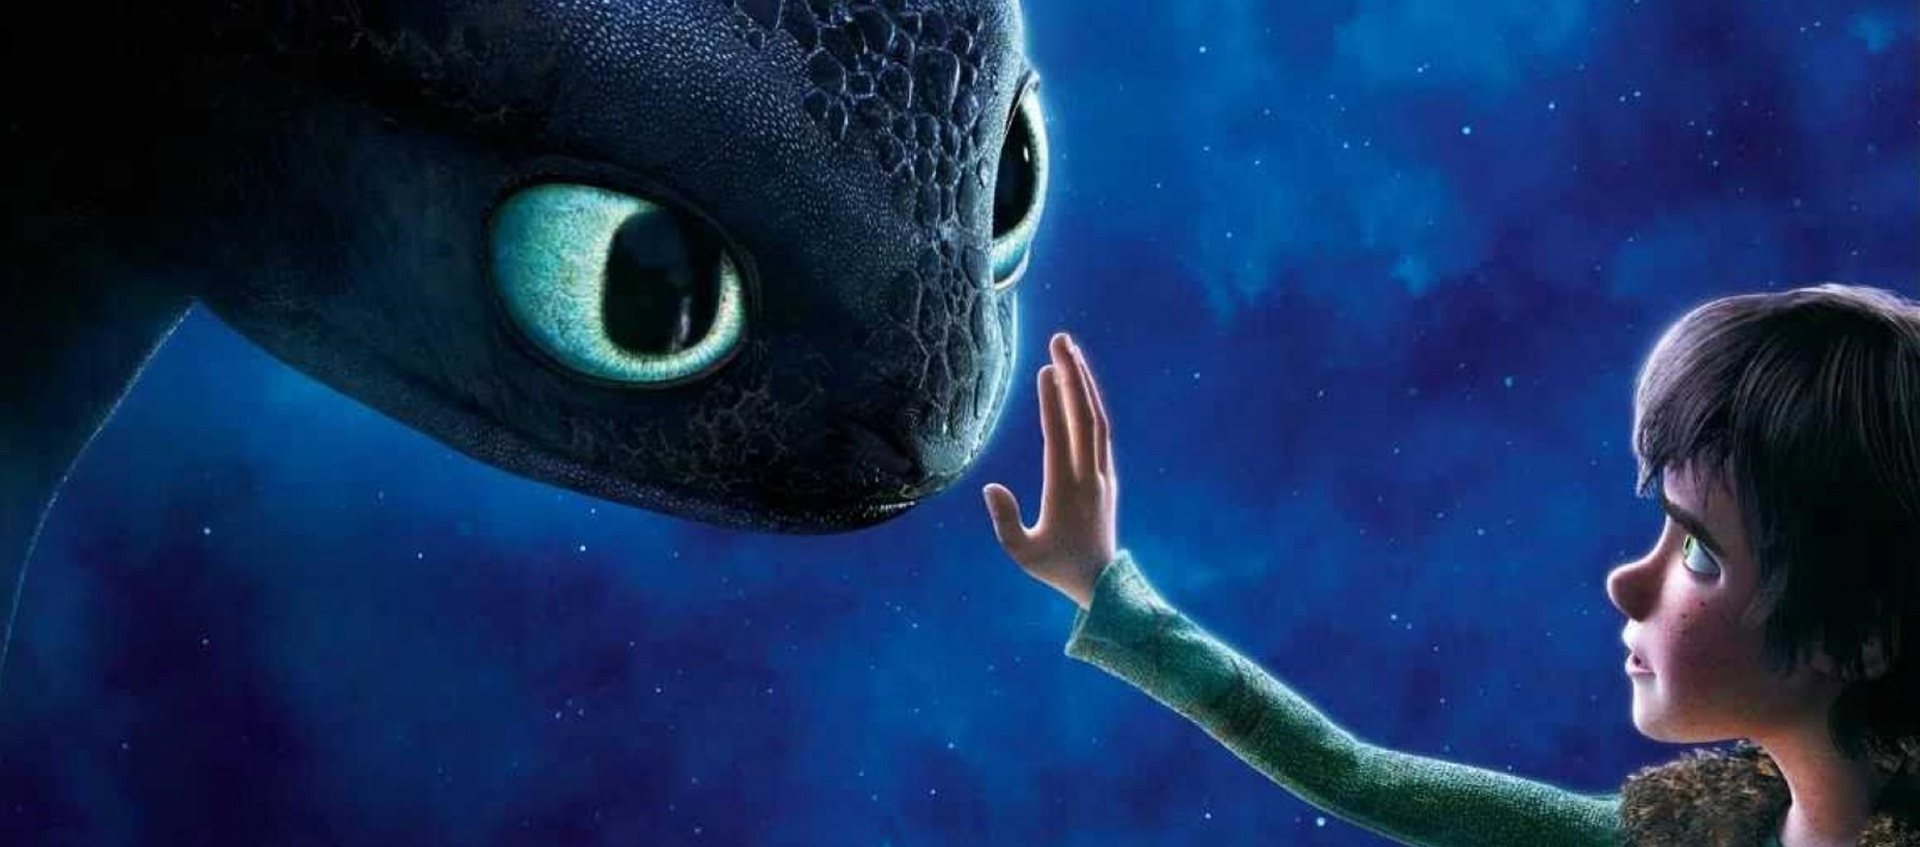 A young cartoon boy is holding up his hand to touch the nose of a large cartoon dragon. The sky behind them is a dark blue and filled with stars. 